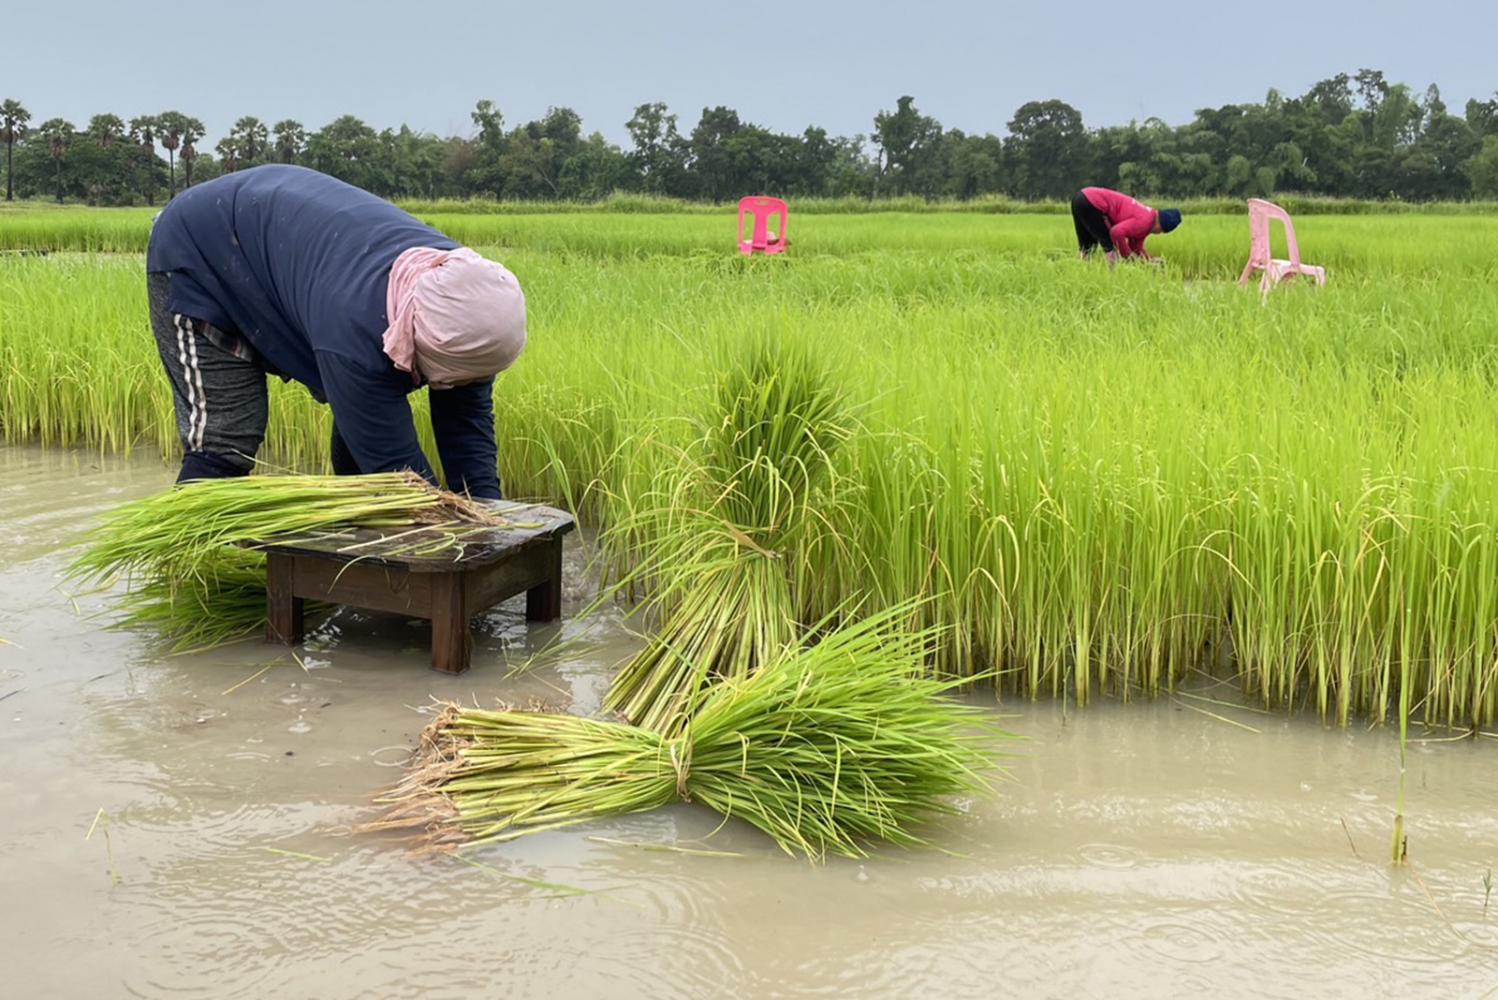 Thailand's agricultural industry